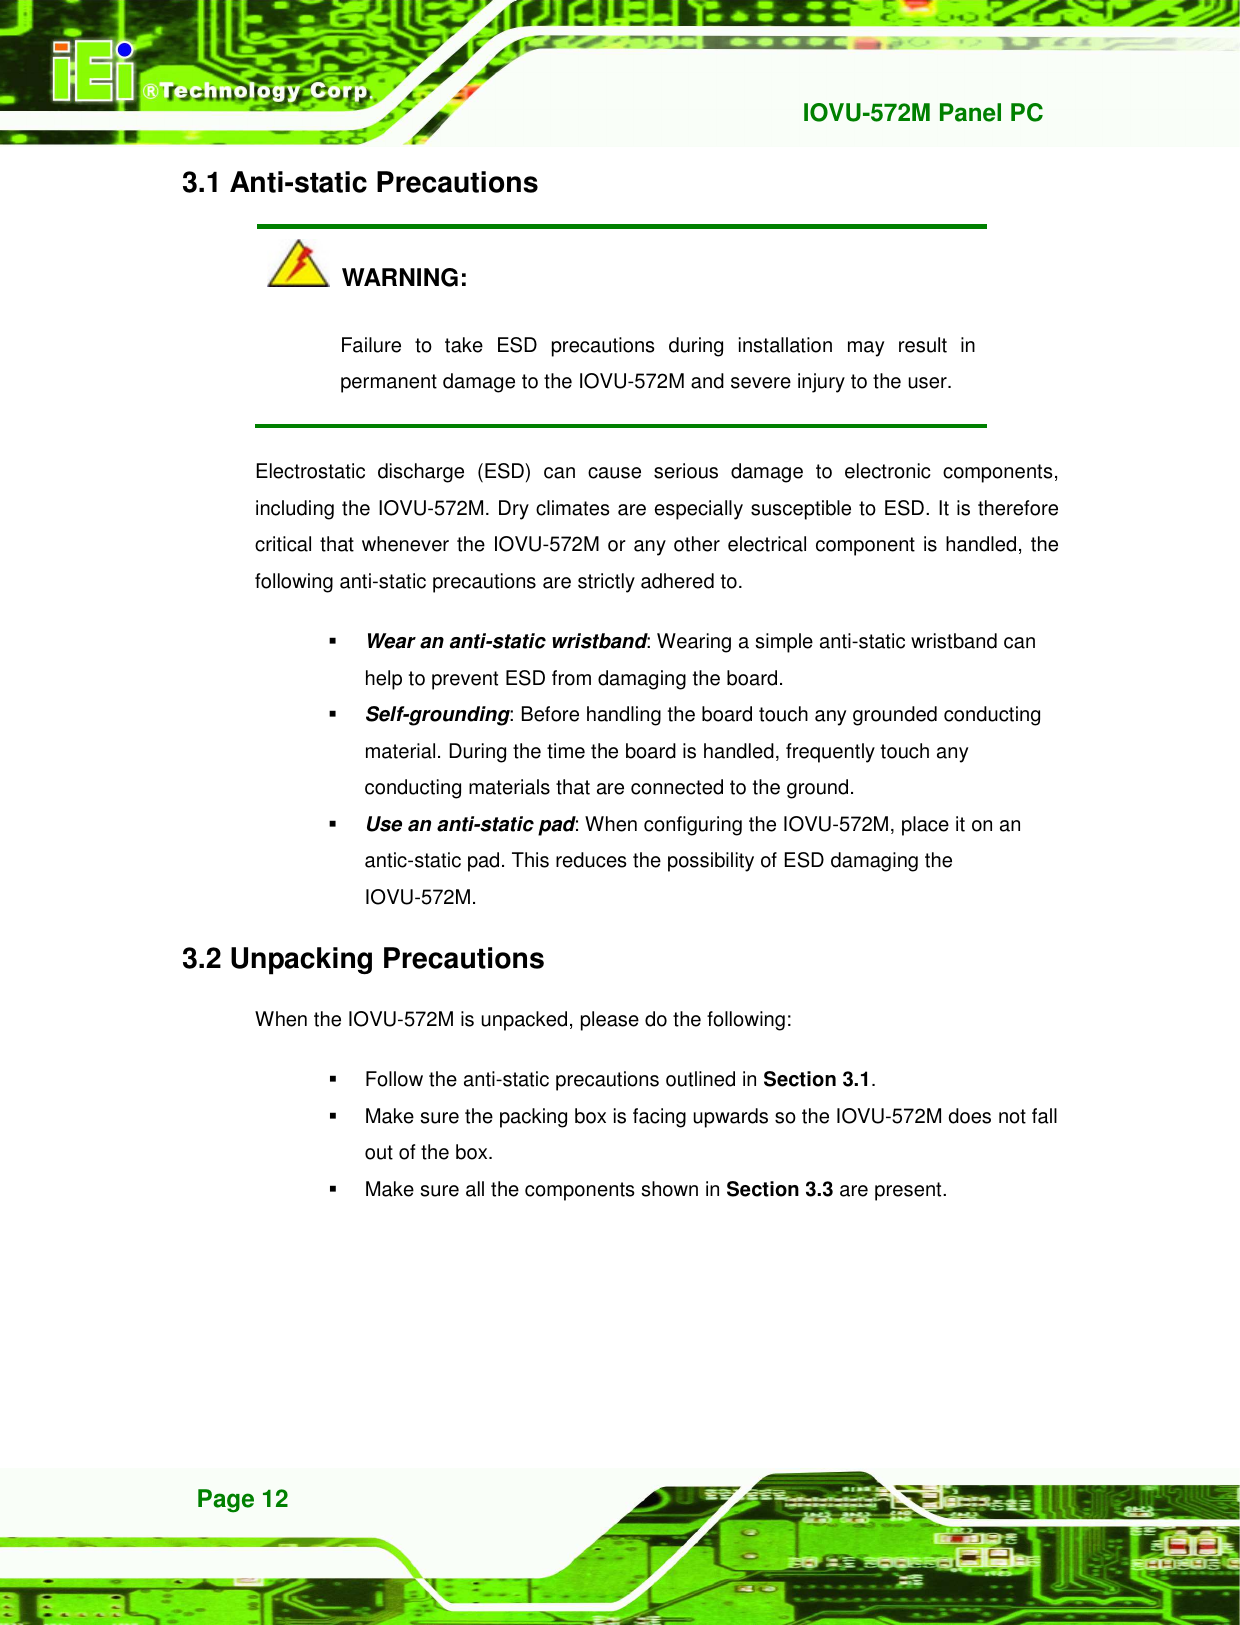   IOVU-572M Panel PC Page 12 3.1 Anti-static Precautions   WARNING: Failure  to  take  ESD  precautions  during  installation  may  result  in permanent damage to the IOVU-572M and severe injury to the user. Electrostatic  discharge  (ESD)  can  cause  serious  damage  to  electronic  components, including the IOVU-572M. Dry climates are especially susceptible to ESD. It is therefore critical that whenever the IOVU-572M or any other electrical component is handled, the following anti-static precautions are strictly adhered to.  Wear an anti-static wristband: Wearing a simple anti-static wristband can help to prevent ESD from damaging the board.  Self-grounding: Before handling the board touch any grounded conducting material. During the time the board is handled, frequently touch any conducting materials that are connected to the ground.  Use an anti-static pad: When configuring the IOVU-572M, place it on an antic-static pad. This reduces the possibility of ESD damaging the IOVU-572M. 3.2 Unpacking Precautions When the IOVU-572M is unpacked, please do the following:   Follow the anti-static precautions outlined in Section 3.1.   Make sure the packing box is facing upwards so the IOVU-572M does not fall out of the box.   Make sure all the components shown in Section 3.3 are present. 